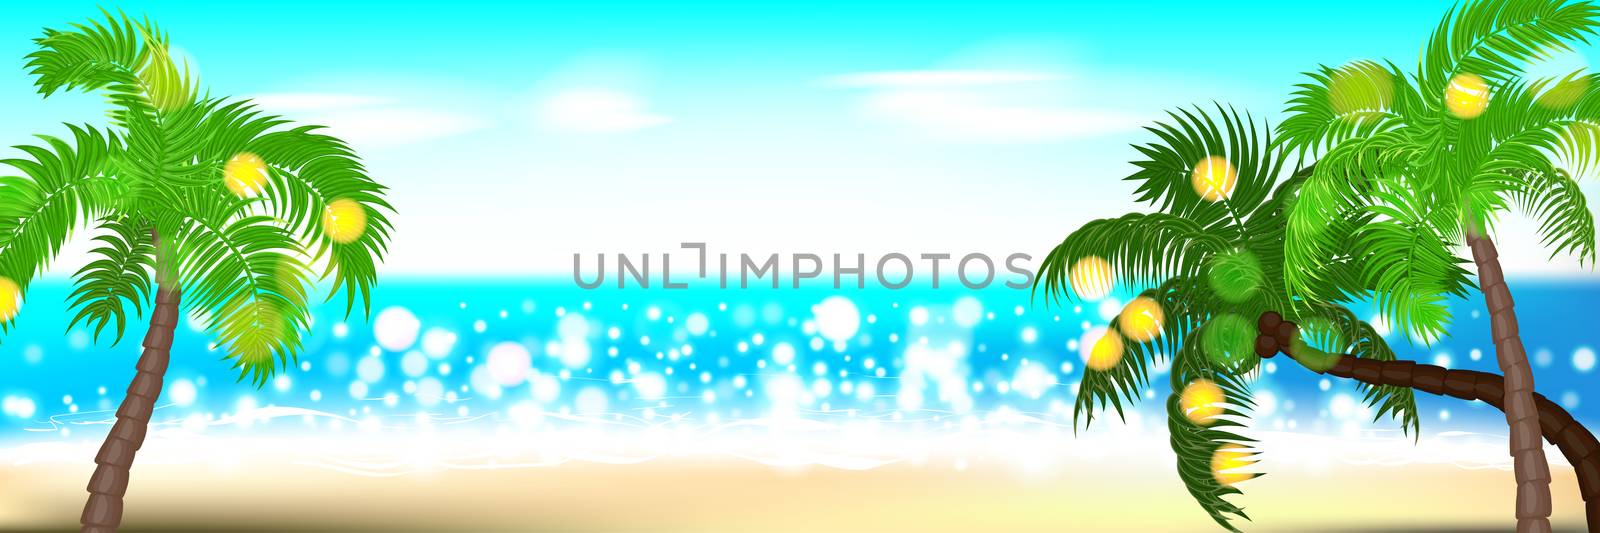 Horizontal summer time palm tree banner. Palm leaf seashore sand beach. Ocean poster sunny tropical vector illustration. Hawaii landscape paradise. Colored party invitation.